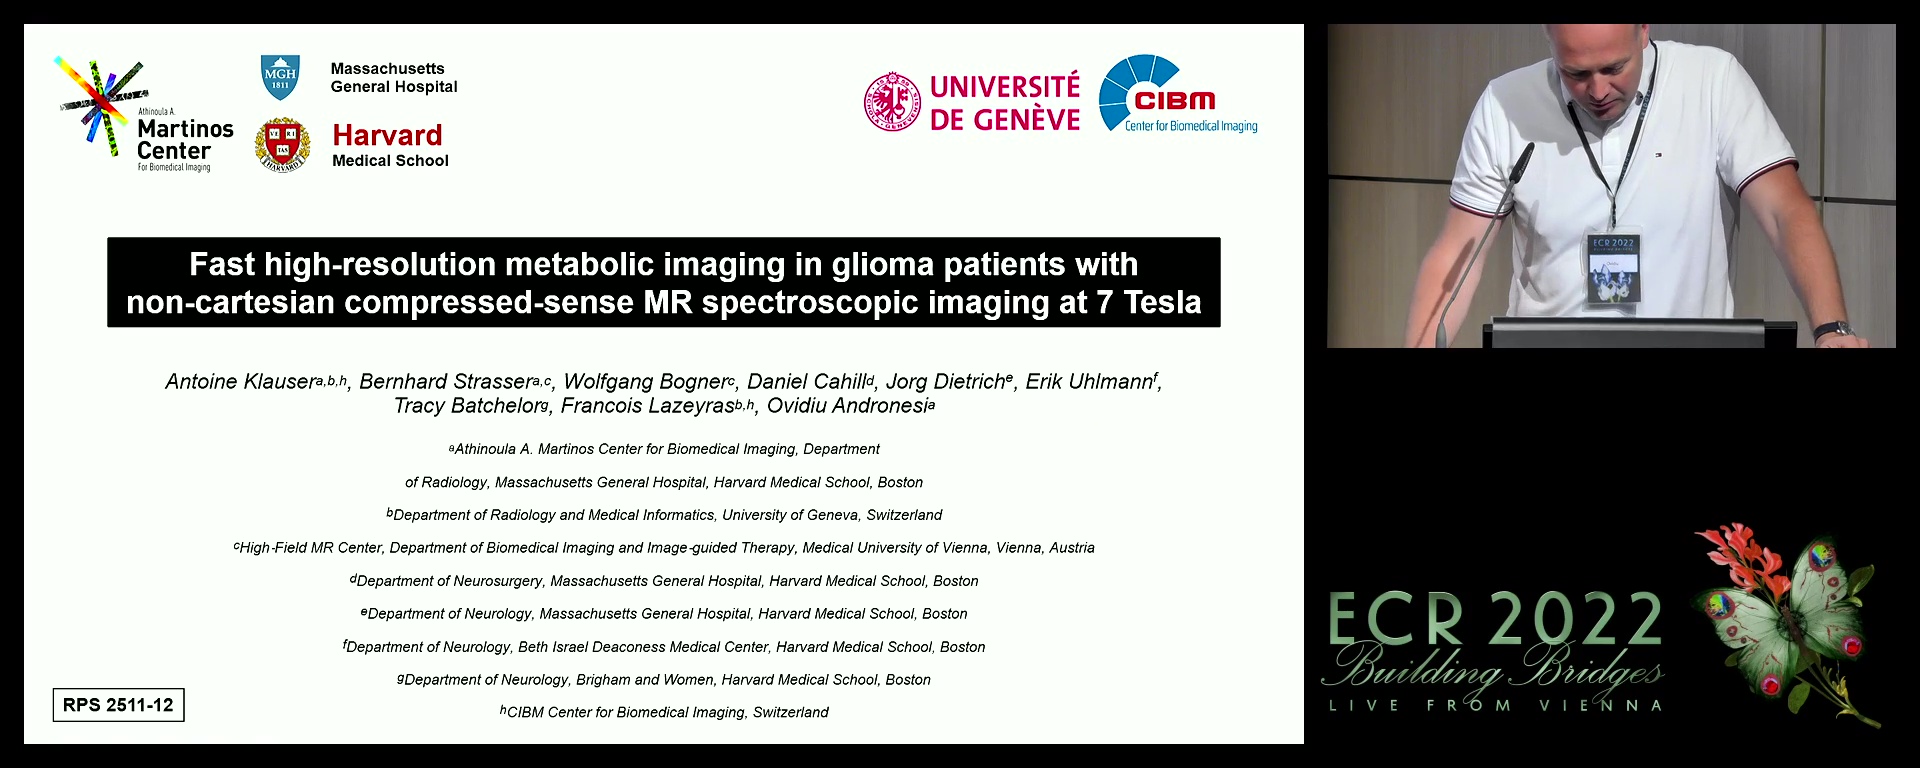 Fast high-resolution metabolic imaging in glioma patients with non-cartesian compressed-sense MR spectroscopic imaging at 7 Tesla